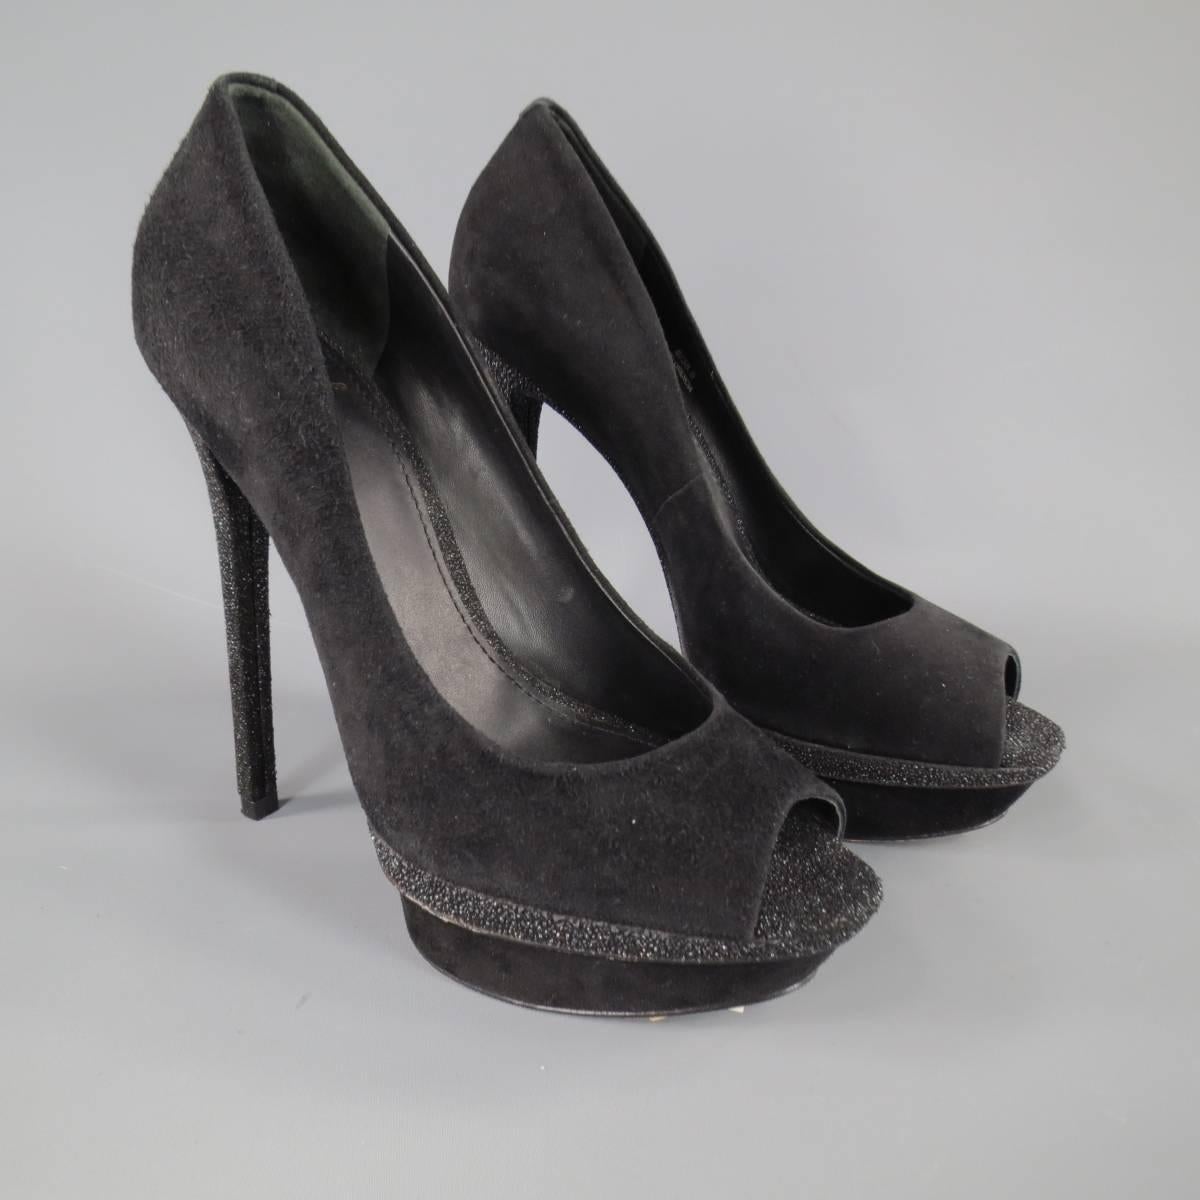 These fabulous B by BRIAN ATWOOD pumps come in black suede with a stacked platform, peep toe, and long glitter stiletto heel.
 
Excellent Pre-Owned Condition.
Marked: 8
 
Measurements:
 
Length: 10 in.
Width: 3.25 in.
Platform: 1.25